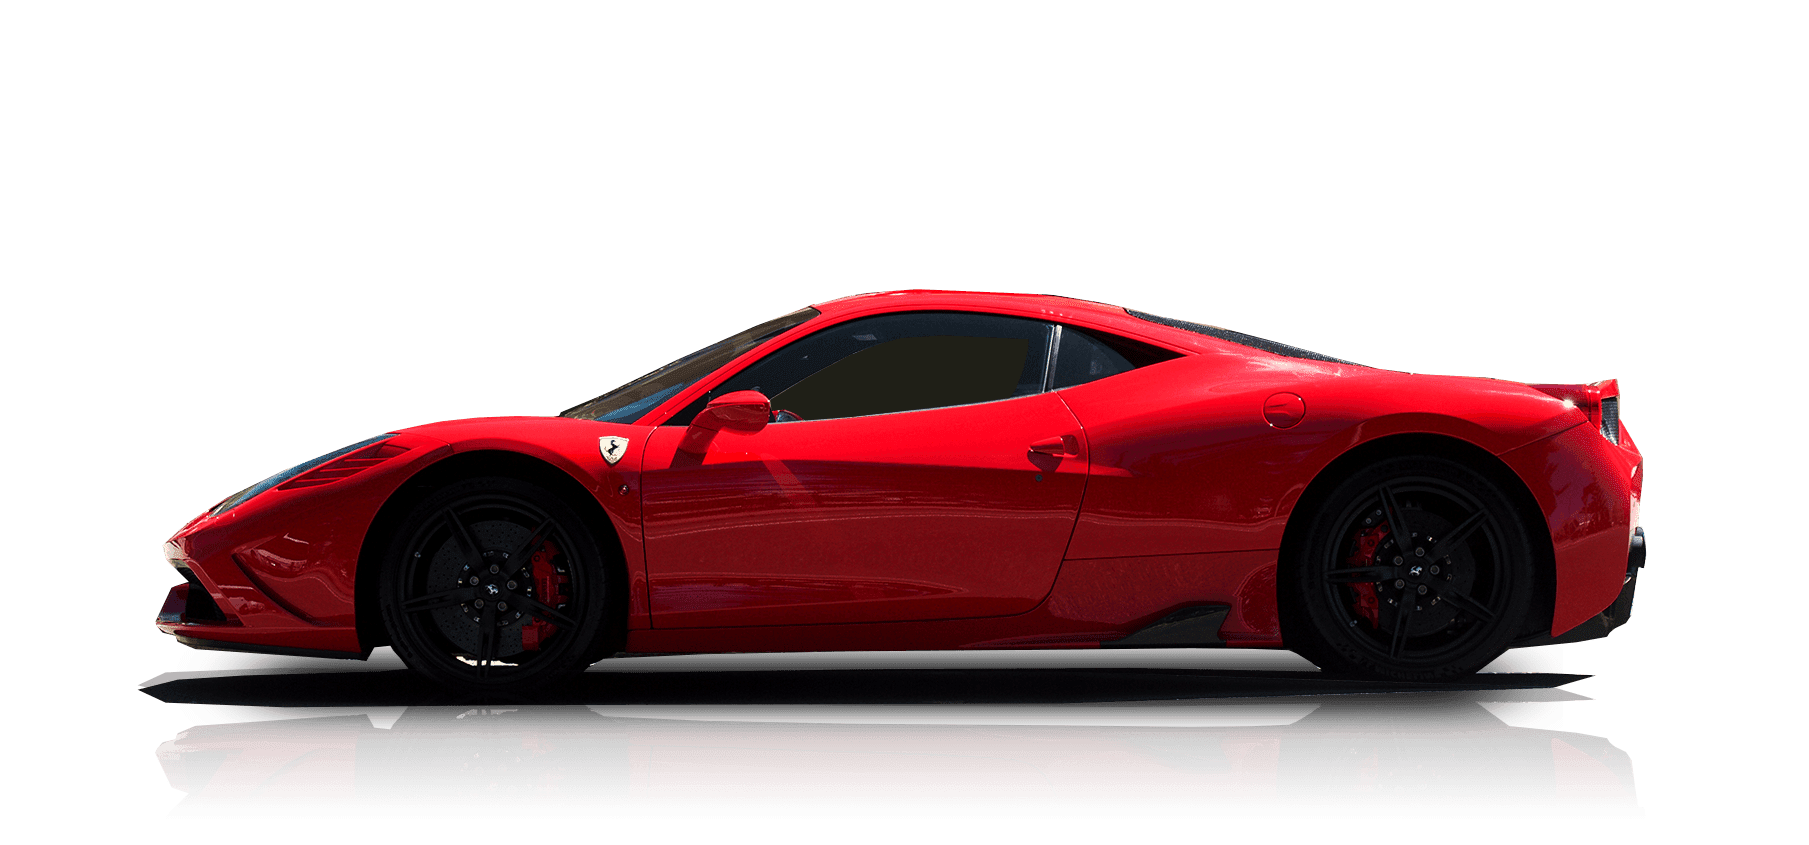 Ferrari Finance Lease Hire Purchase For New Used Models